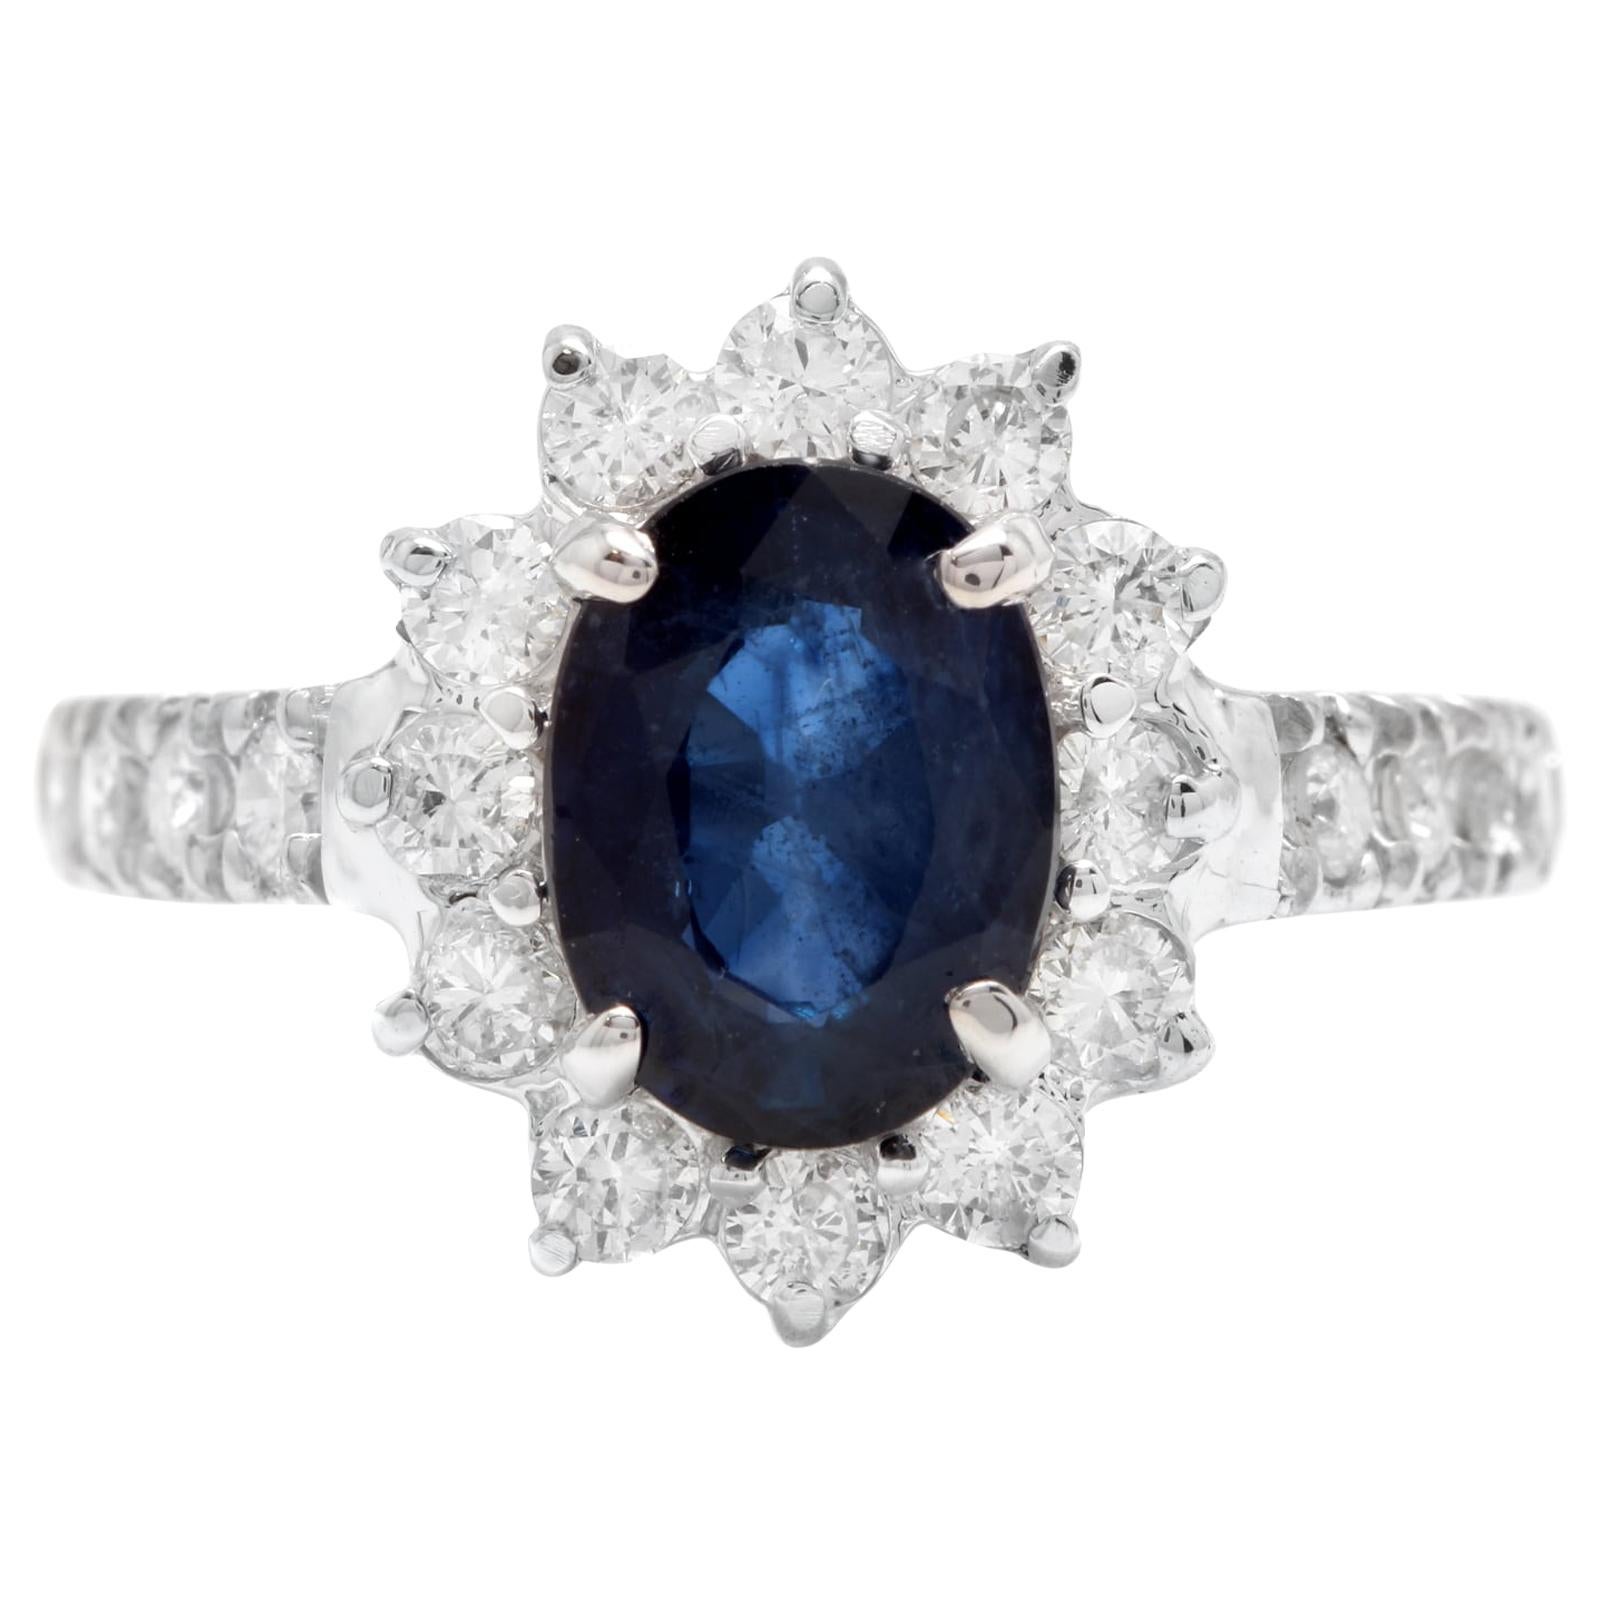 3.25 Carat Exquisite Natural Blue Sapphire and Diamond 14 Karat Solid White Gold